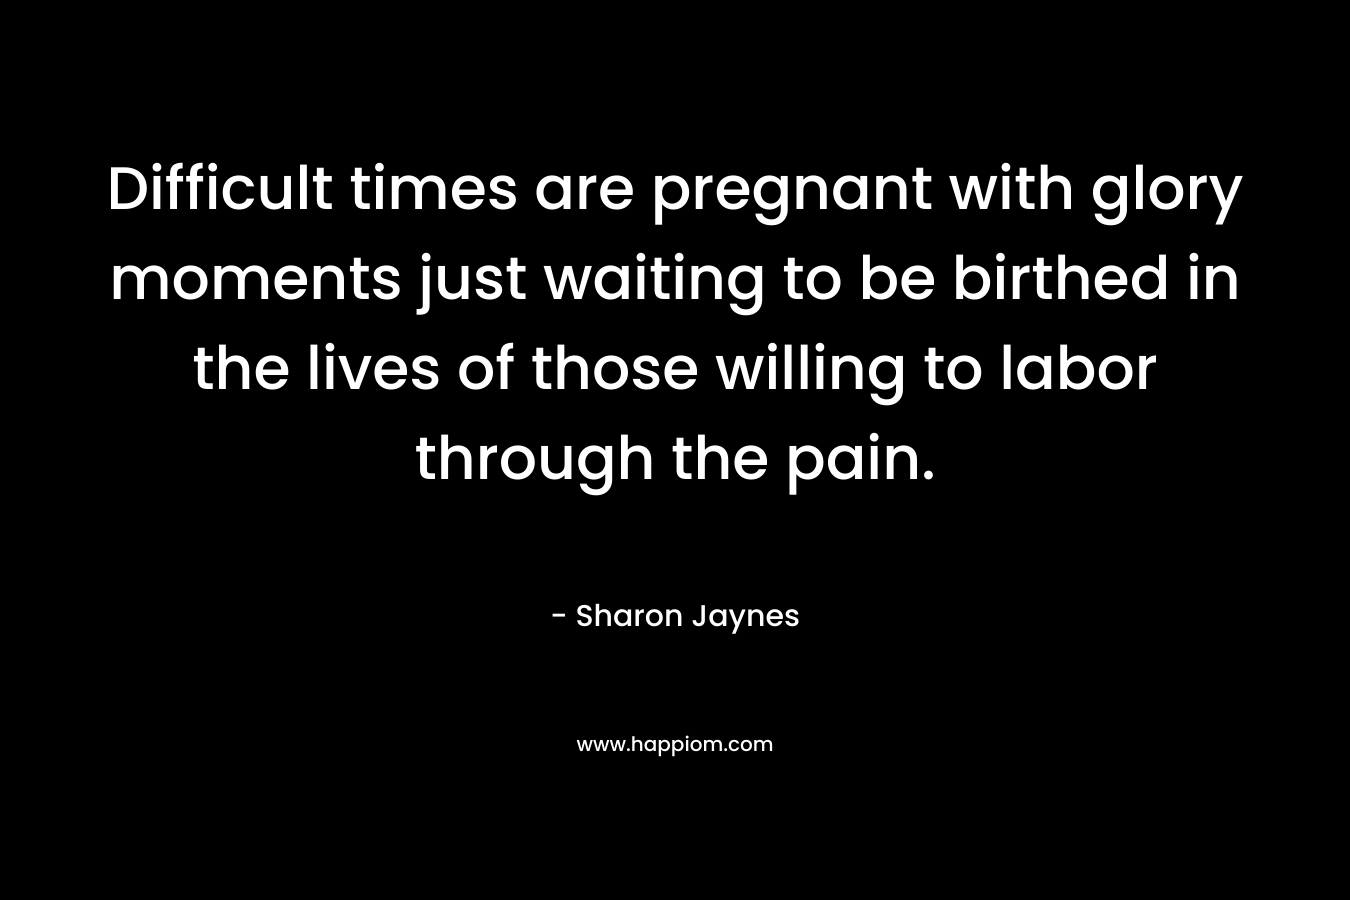 Difficult times are pregnant with glory moments just waiting to be birthed in the lives of those willing to labor through the pain.